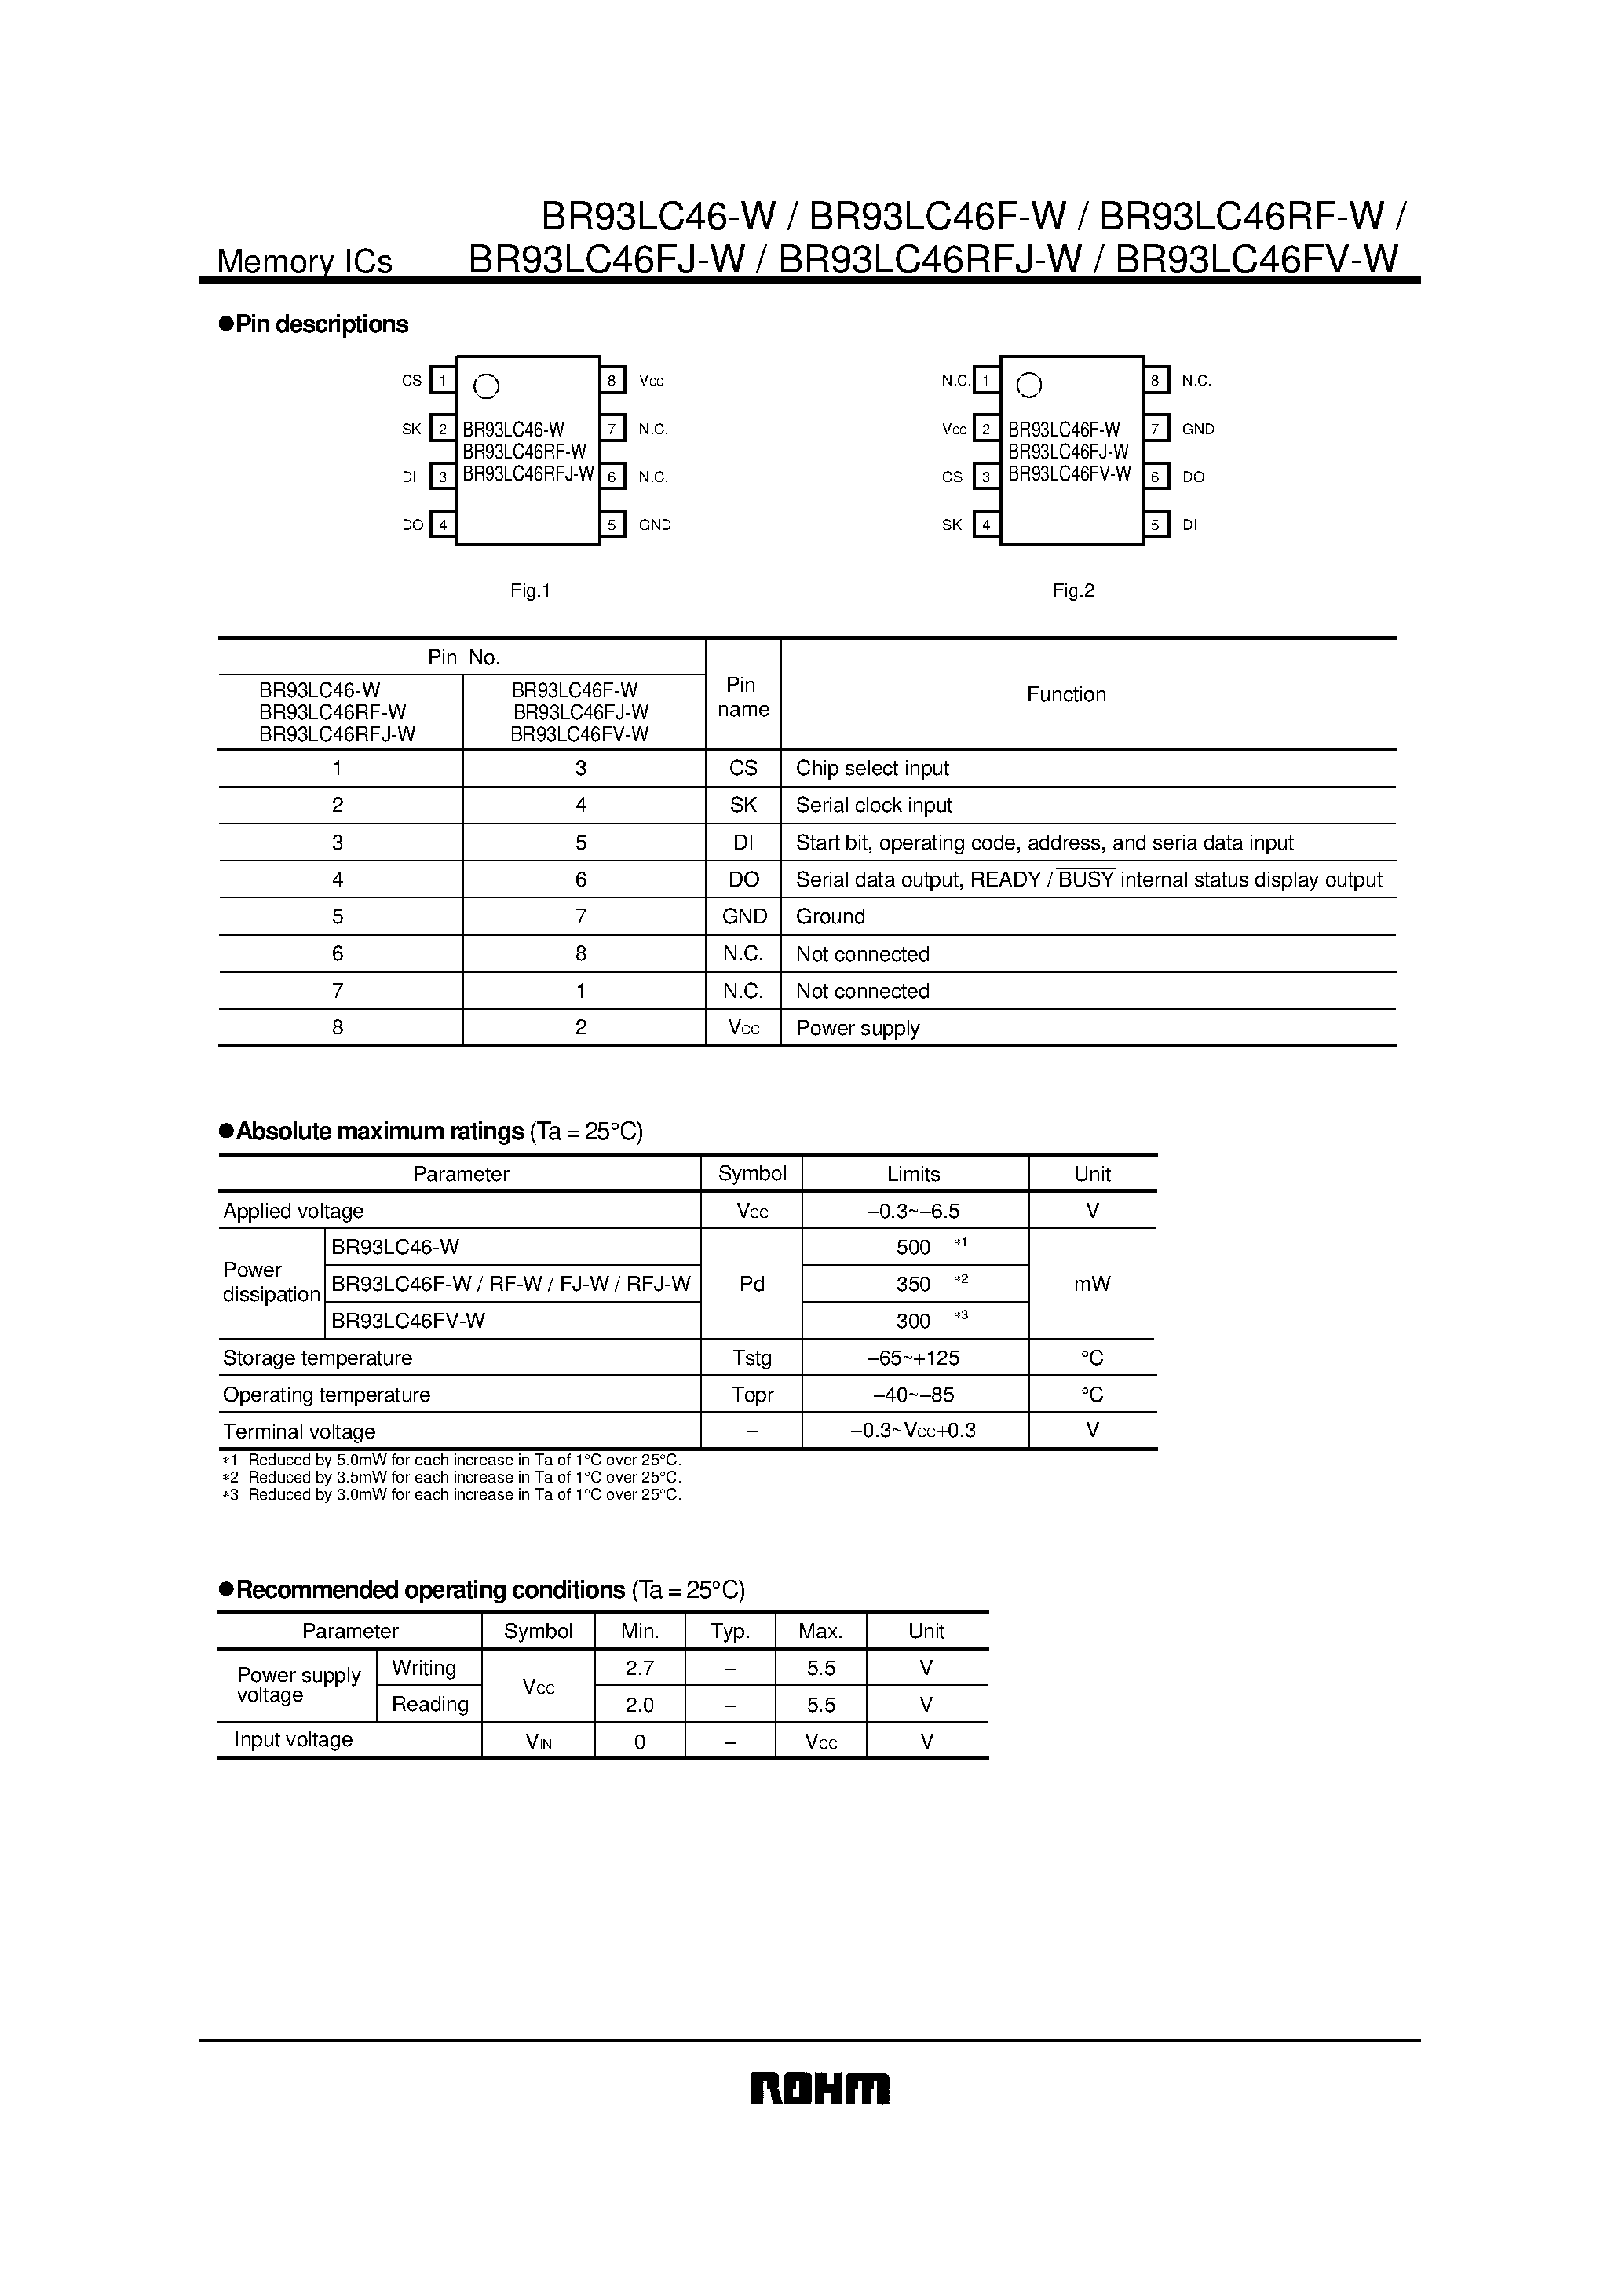 Datasheet BR93LC46F-W - 6416bits serial EEPROM page 2